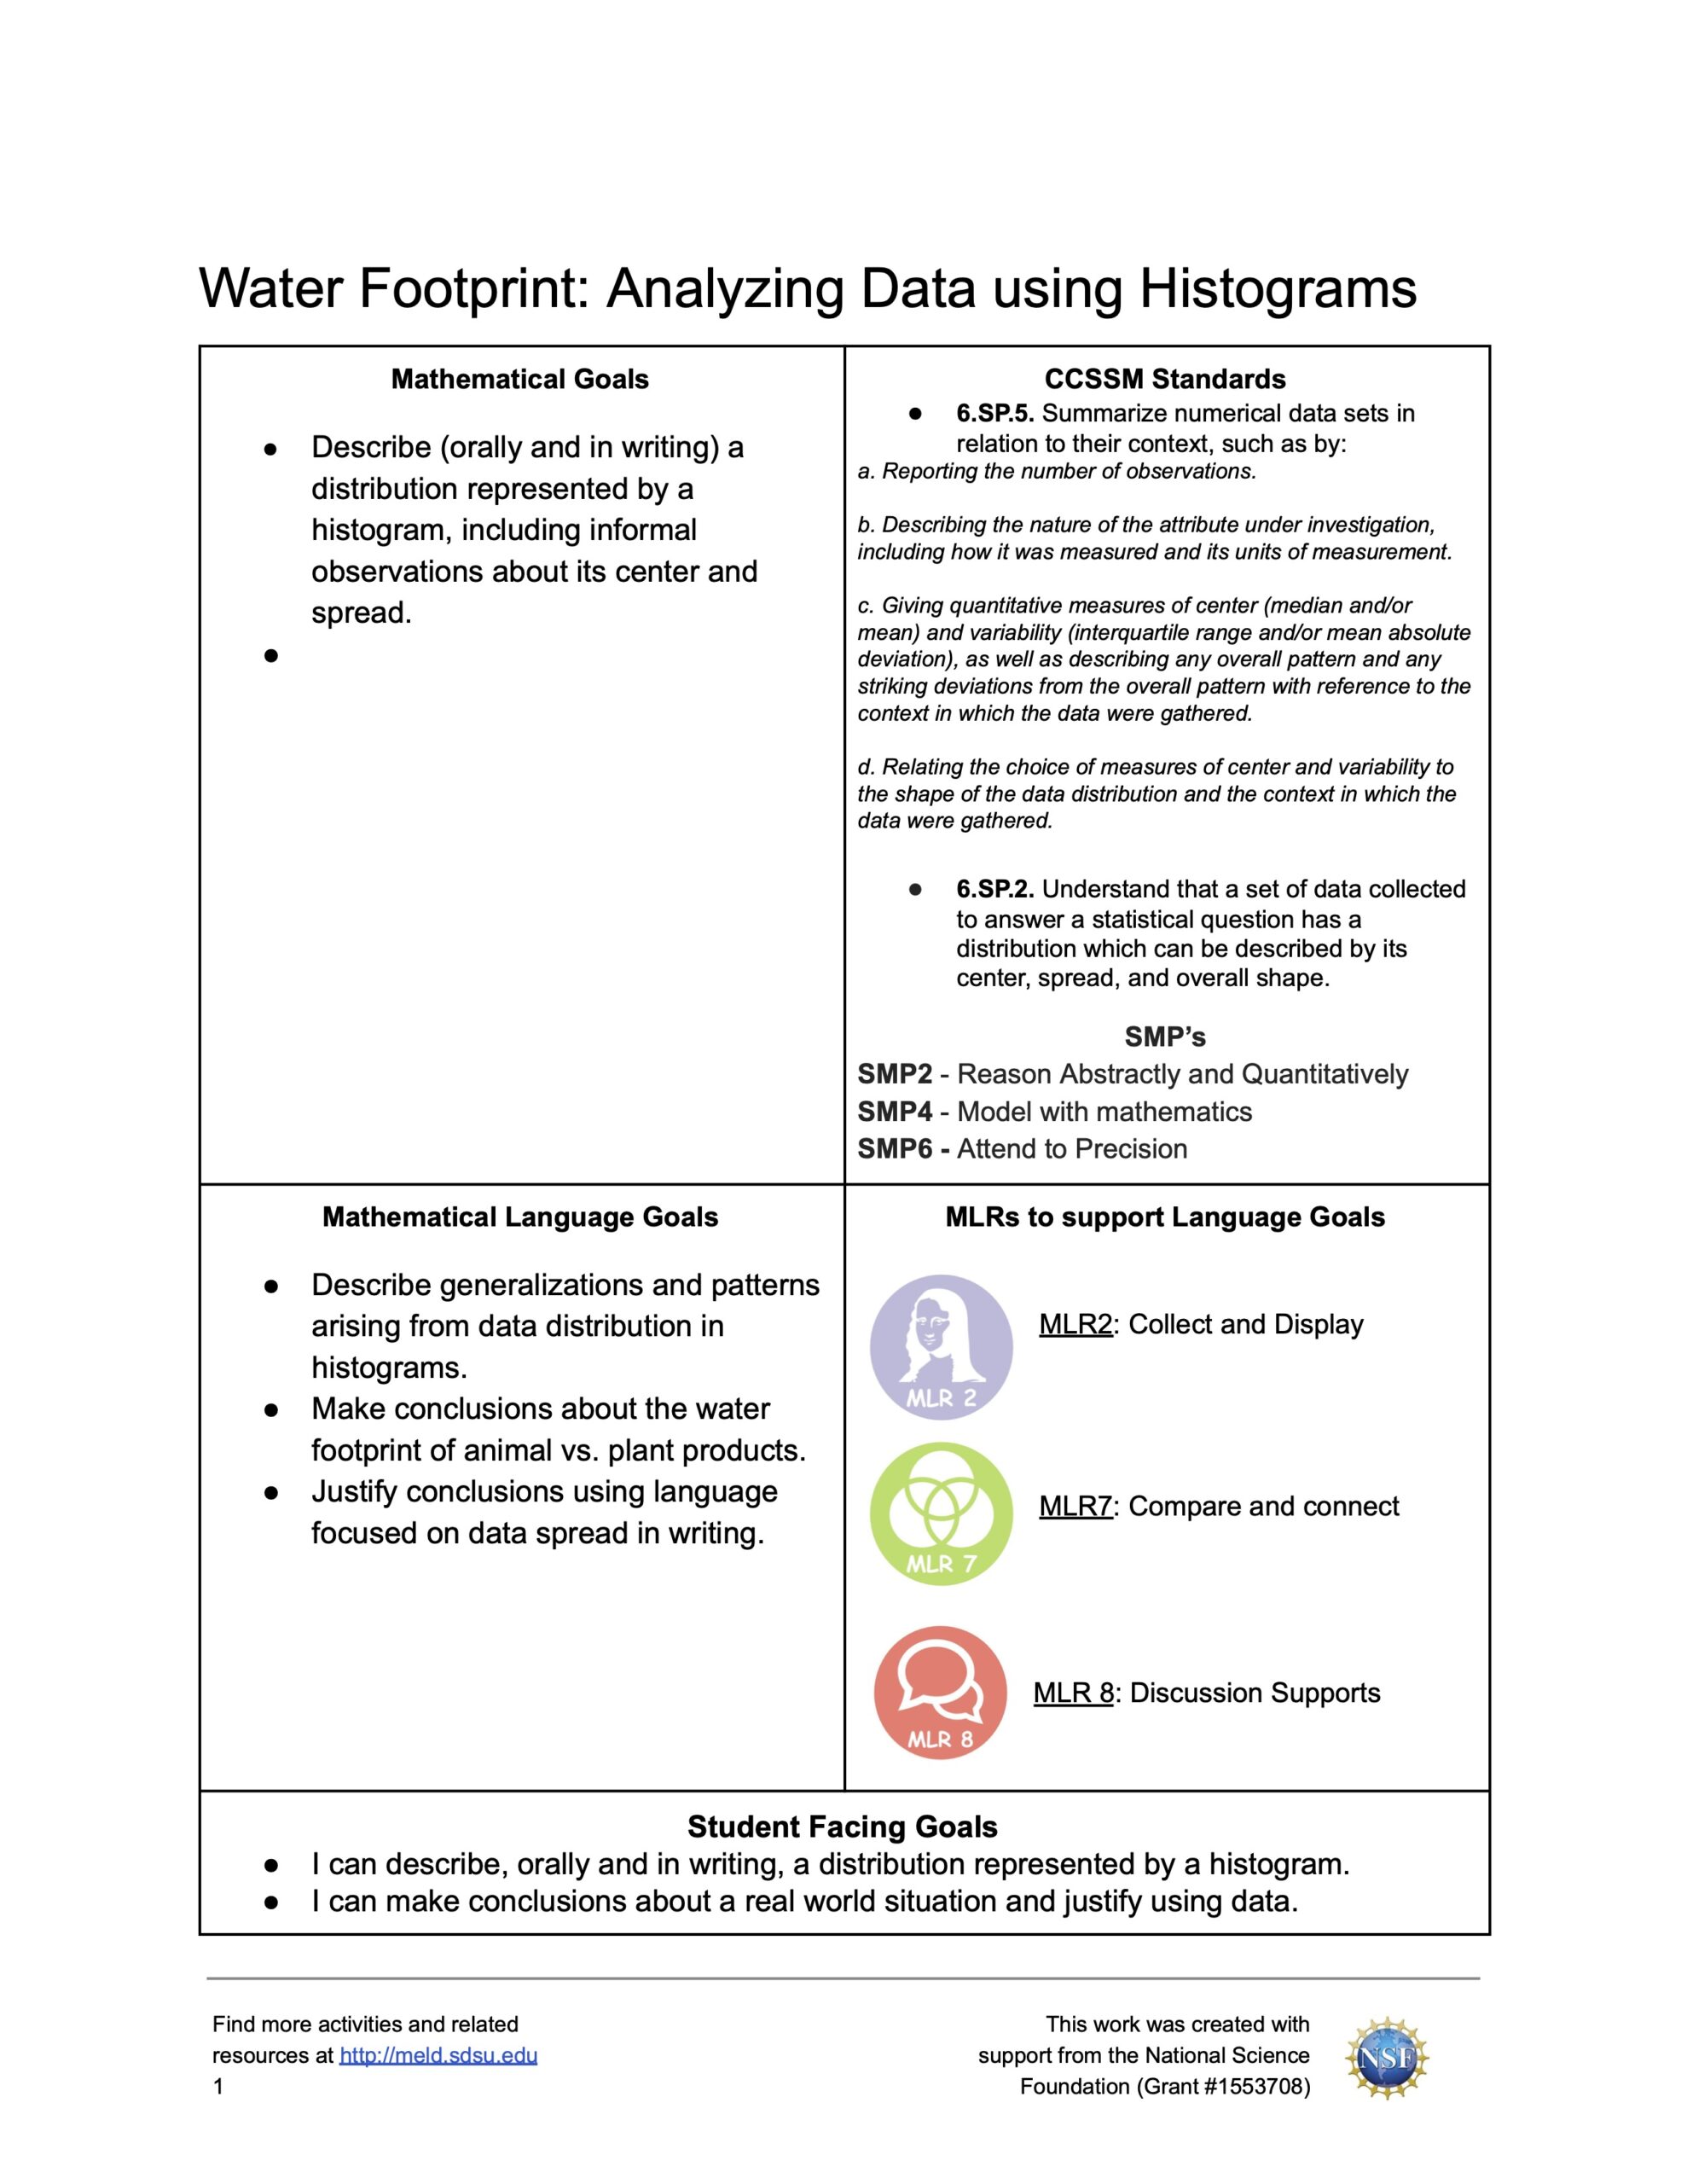 Middle School Math--Water Footprint: Analyzing Data in Histograms